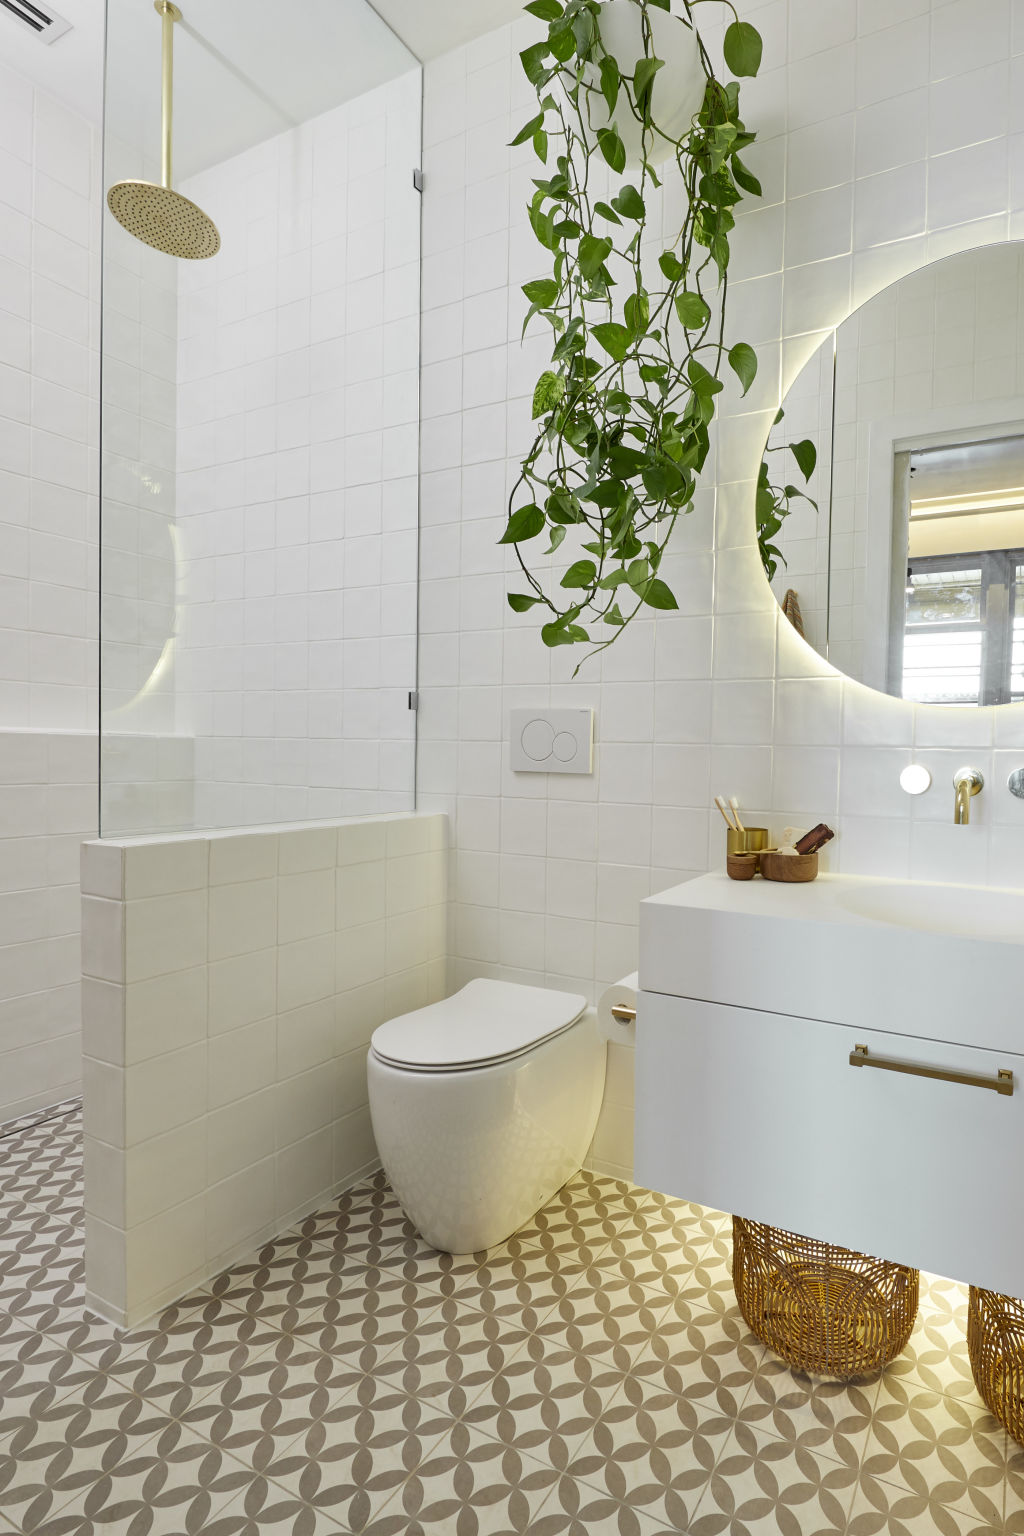 Experts say there is enough texture and pattern to keep it interesting in Andy and Deb's bathroom. Photo: Channel Nine